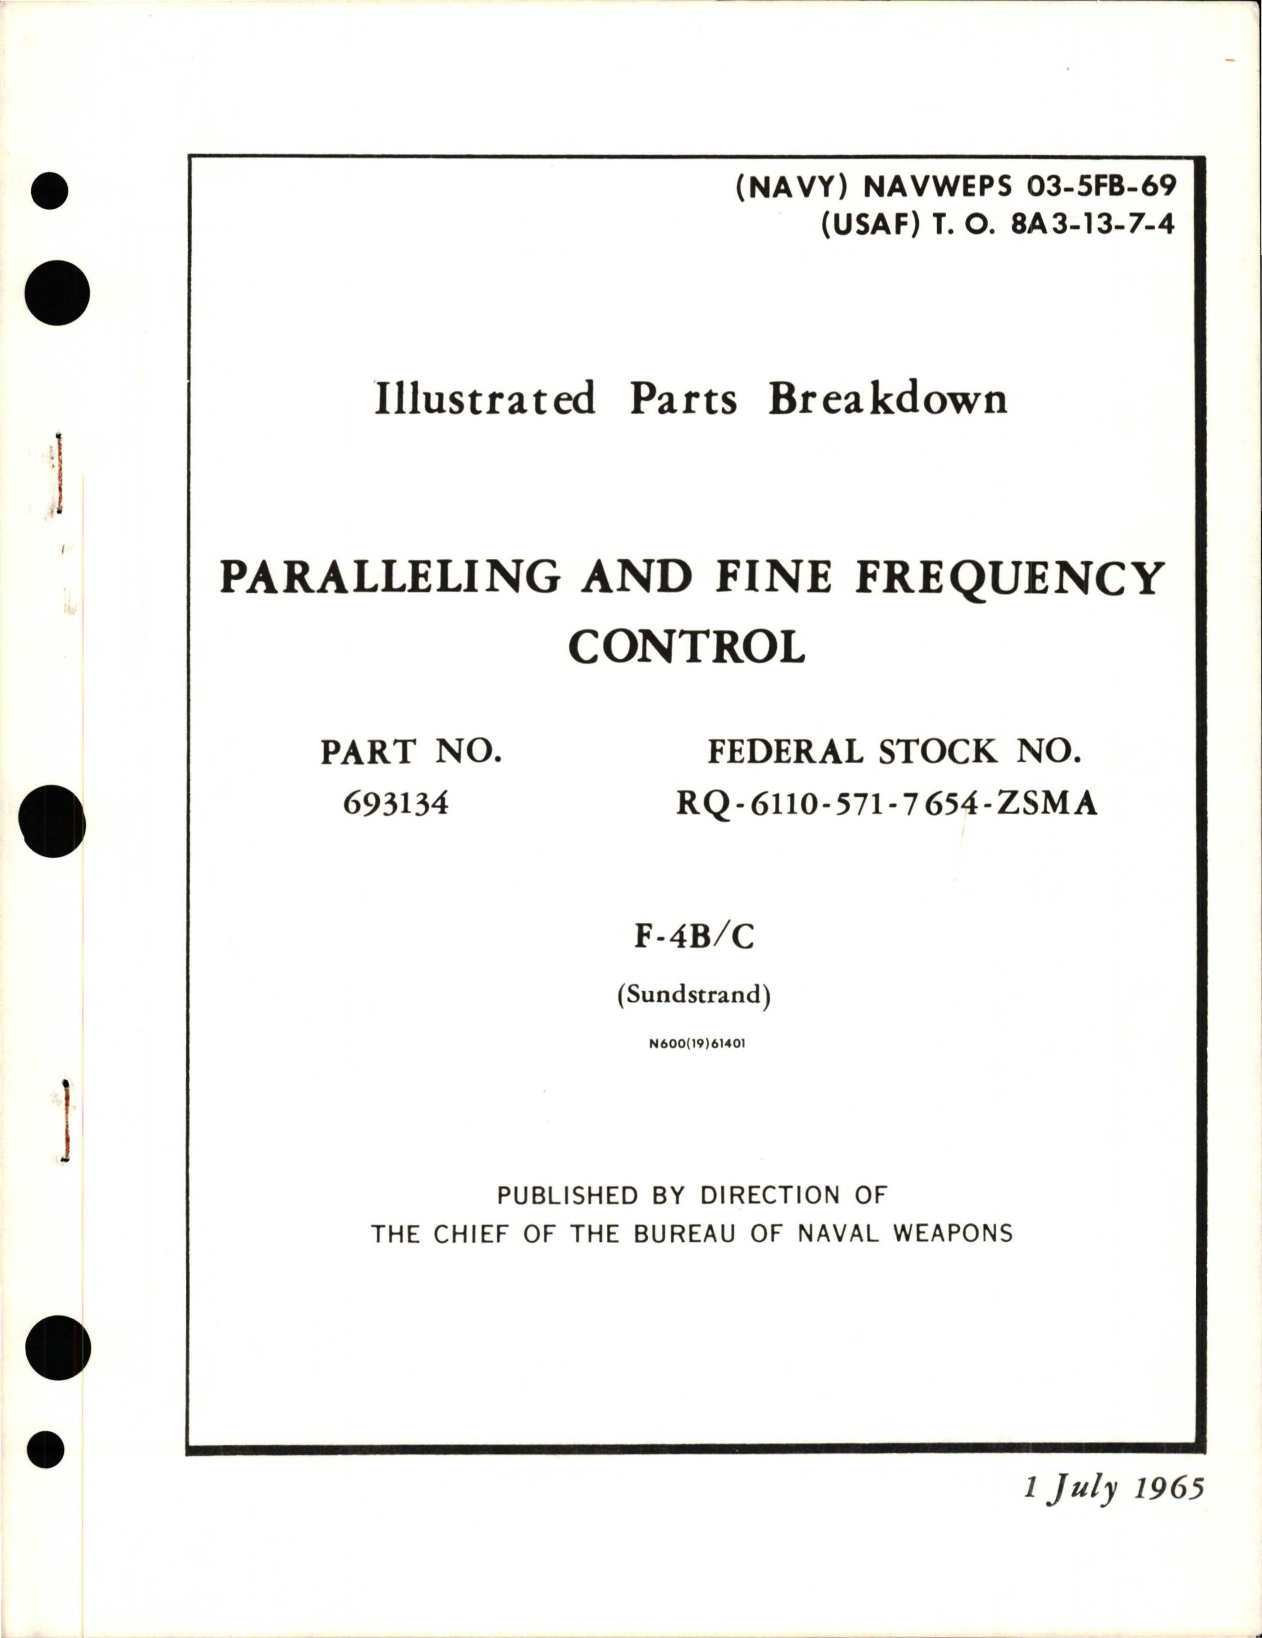 Sample page 1 from AirCorps Library document: Illustrated Parts Breakdown for Paralleling and Fine Frequency Control - Part 693134